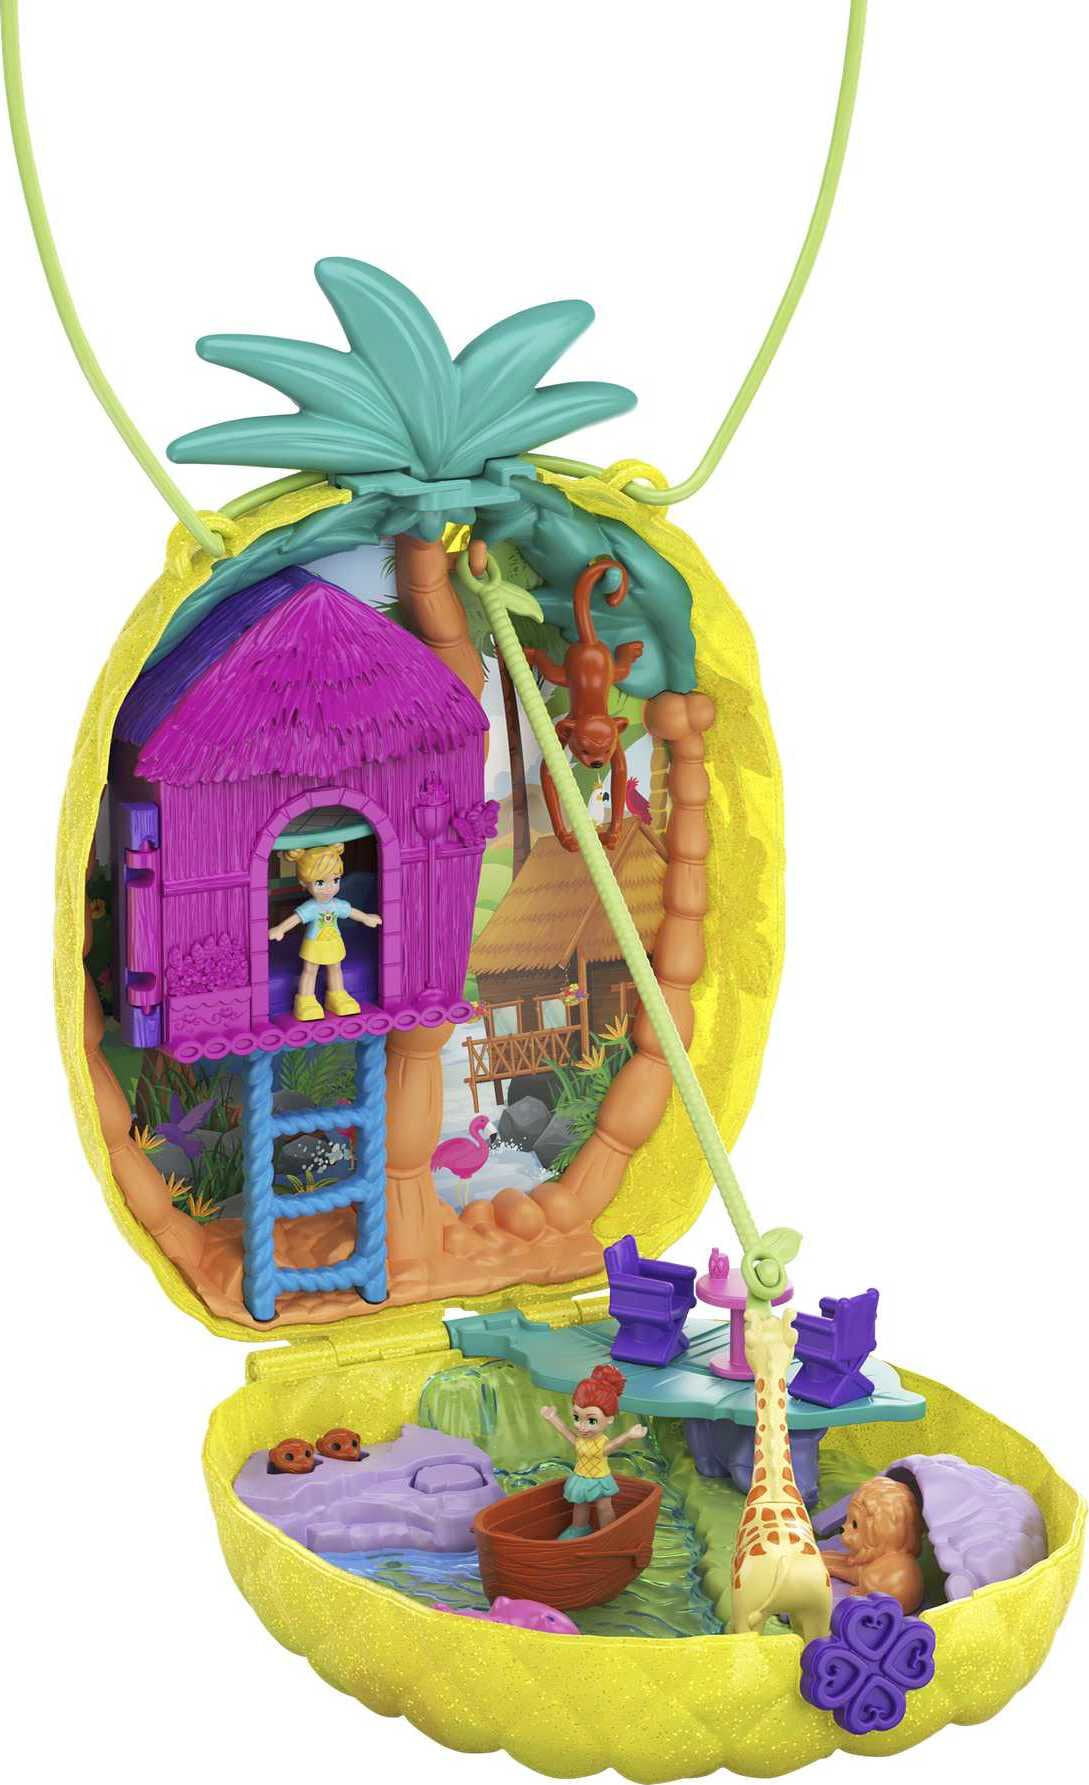 GKJ64 for sale online Polly Pocket Polly & Lila Tropicool Pineapple Wearable Purse Compact Playset 